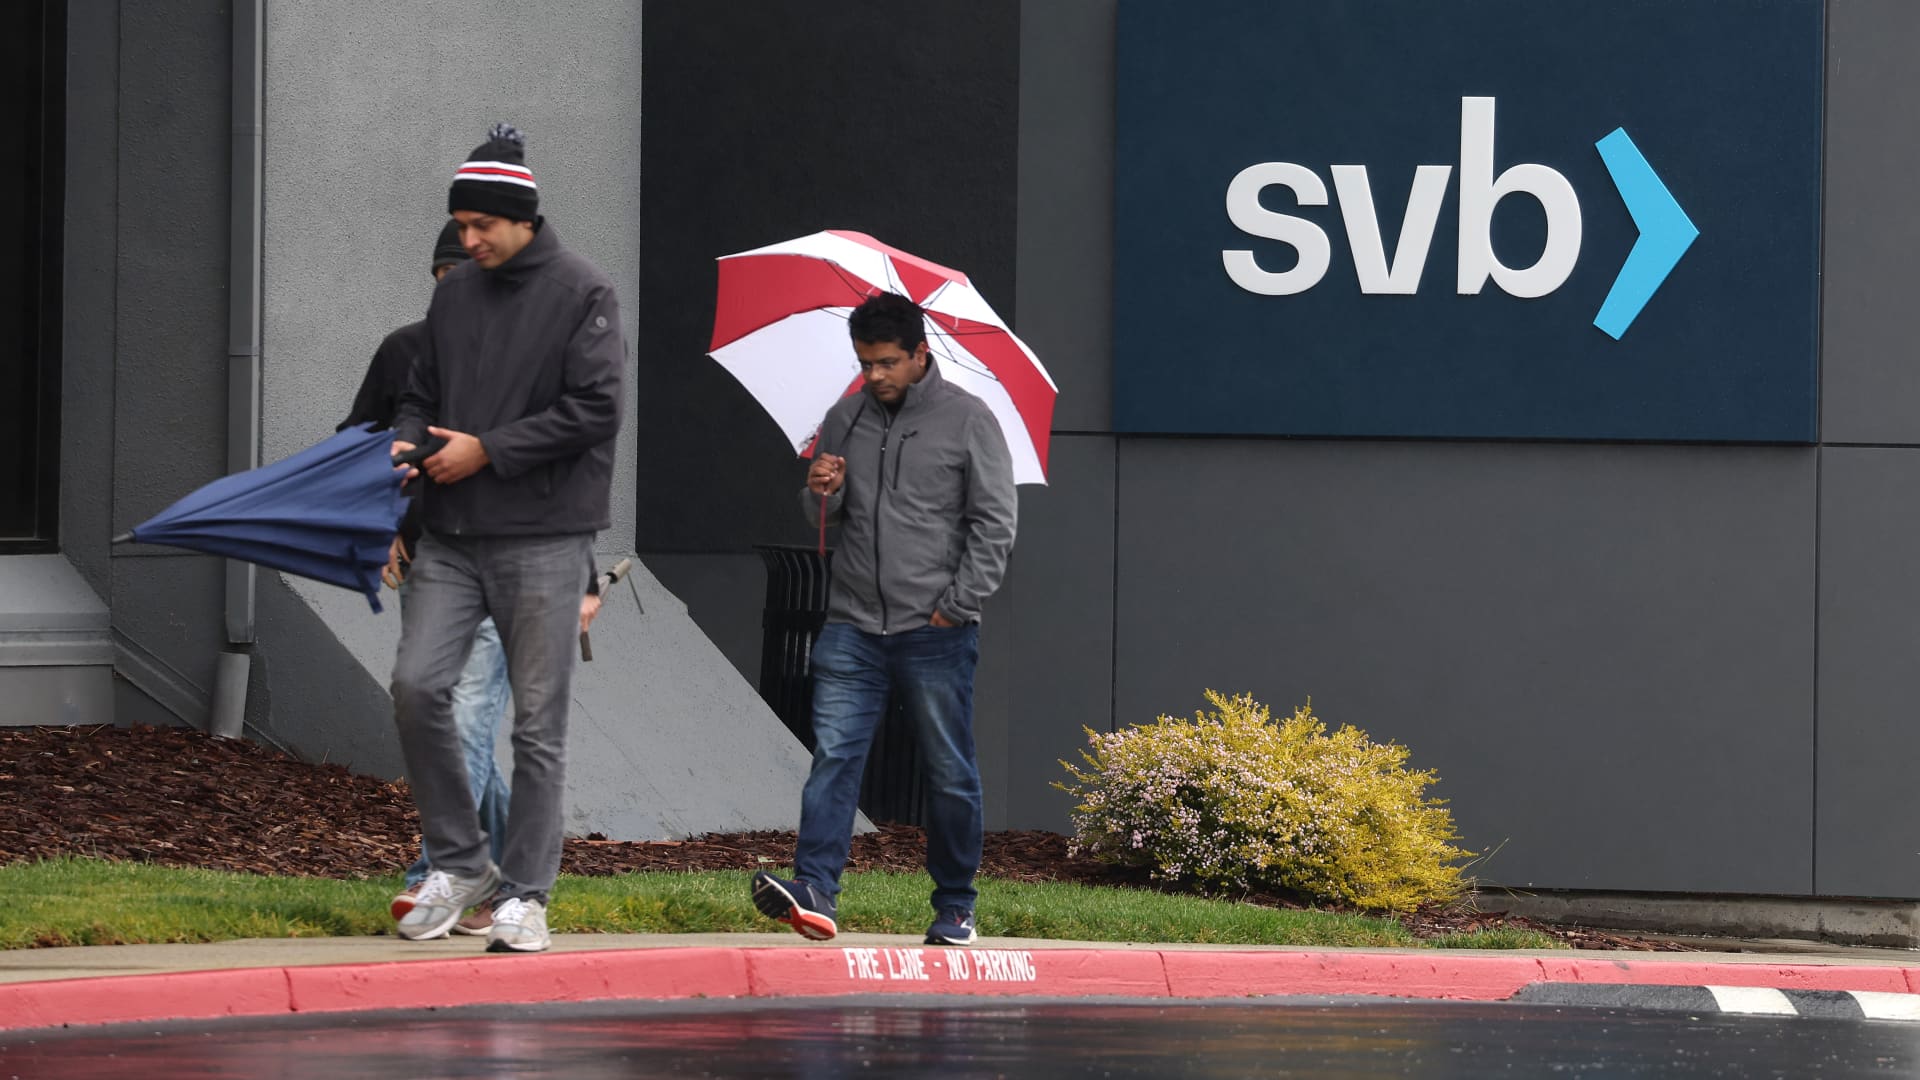 Auction process is reportedly underway to find a buyer for Silicon Valley Bank